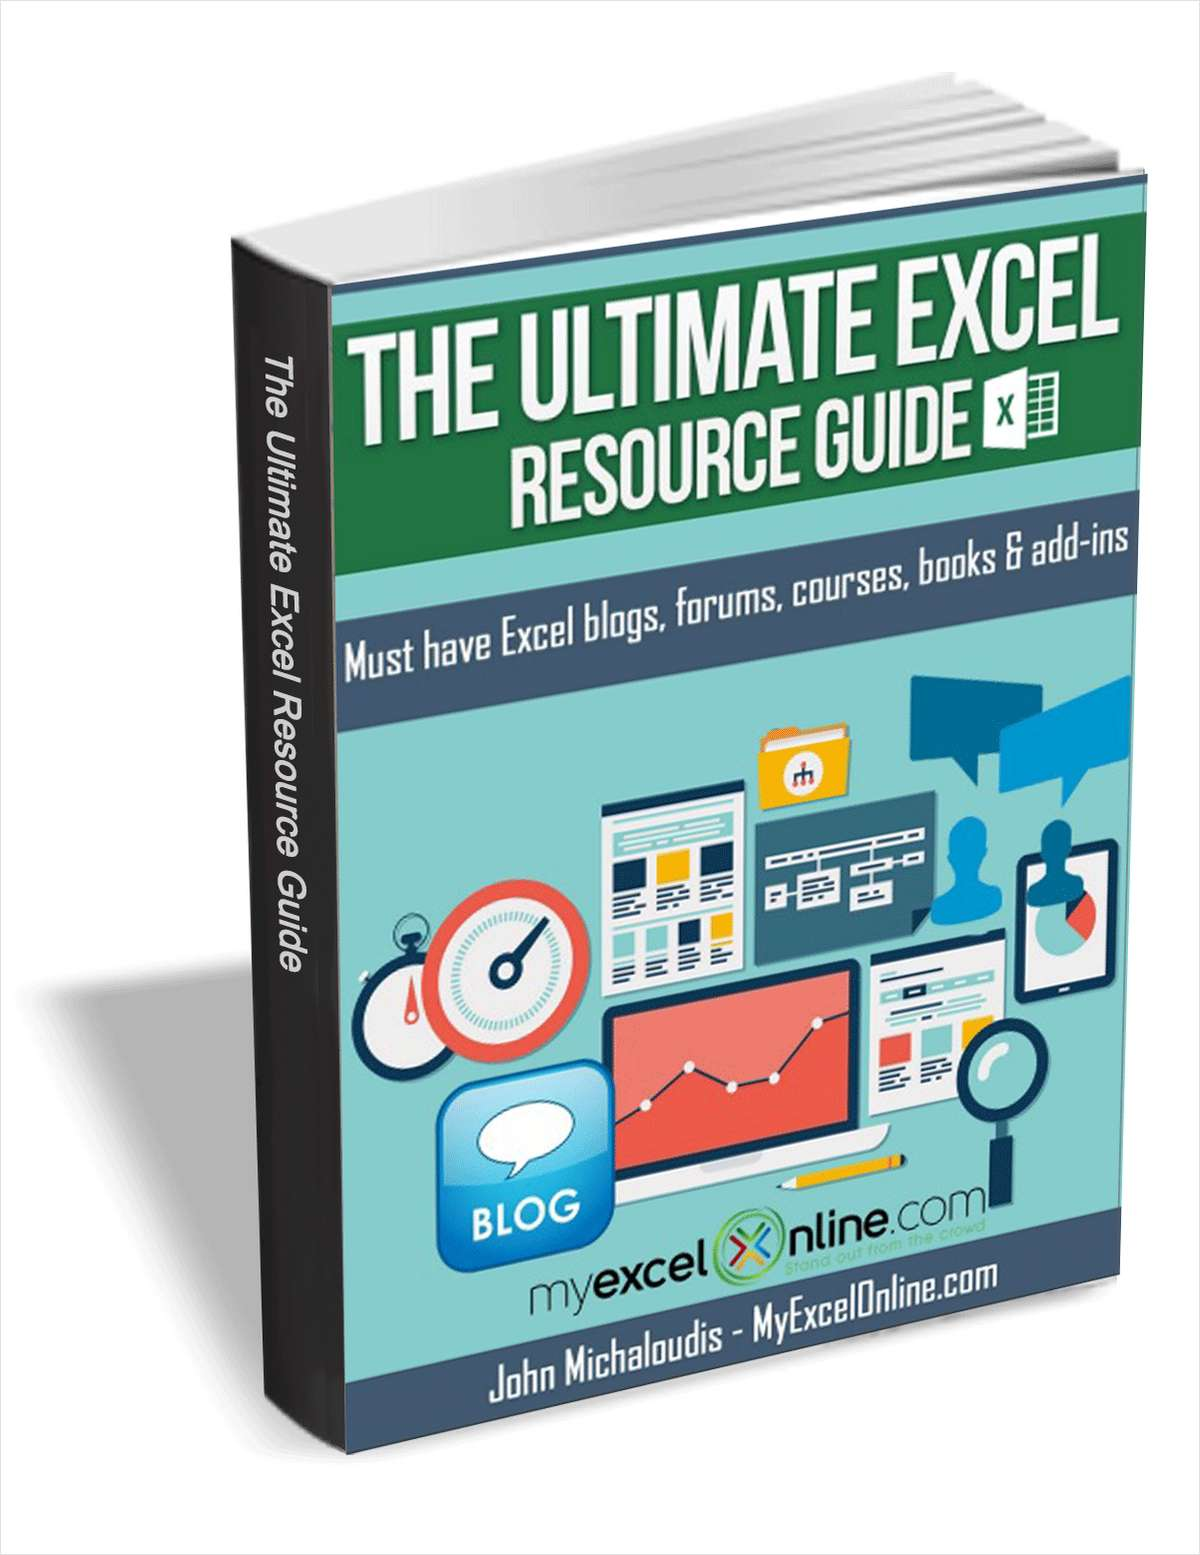 The Ultimate Excel Resource Guide Screenshot